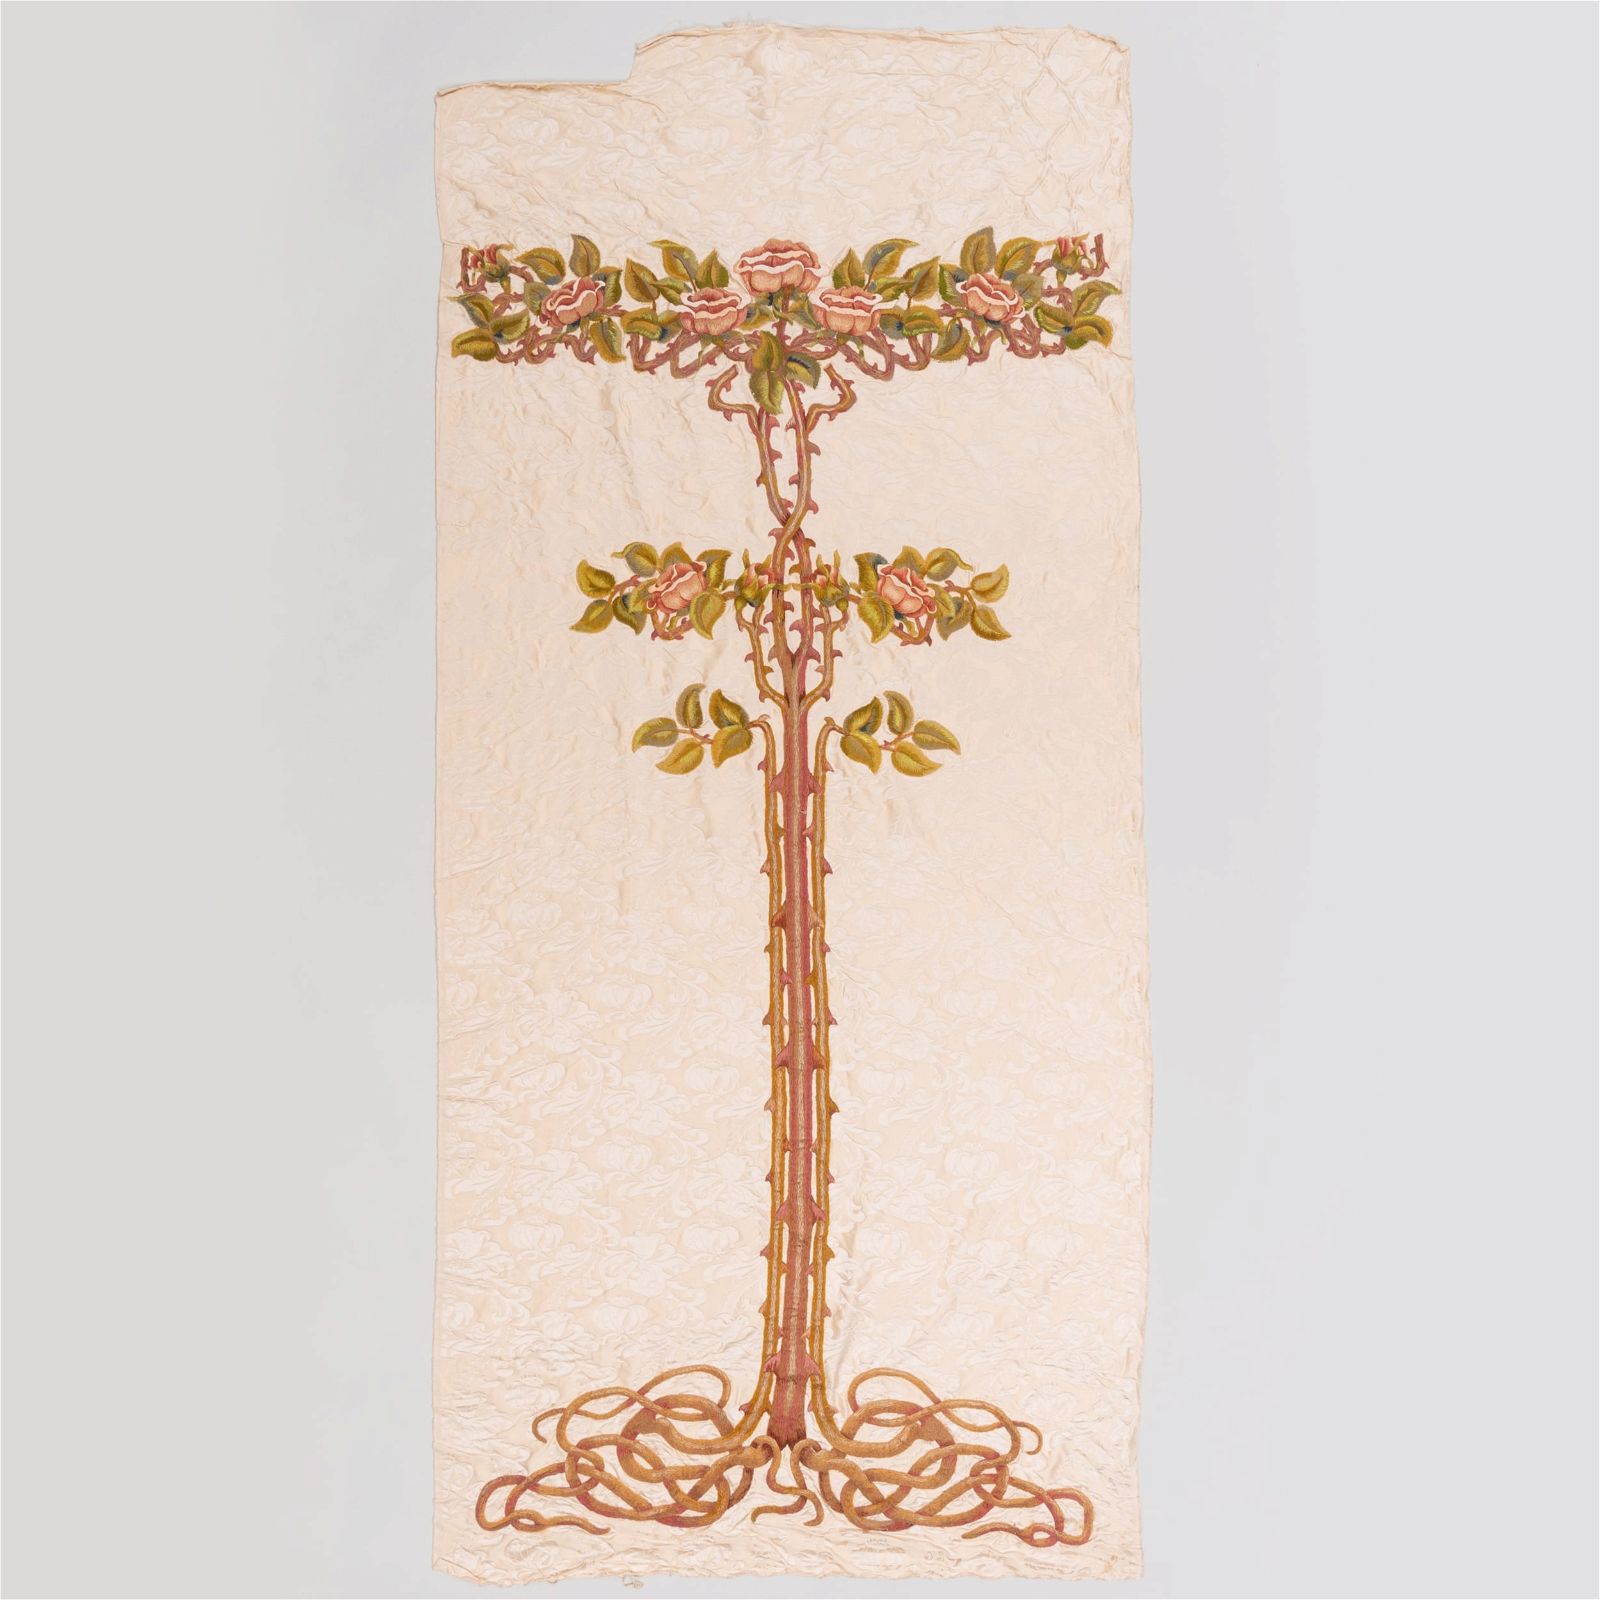 Silk damask and crewel work hanging designed by Alexander Fisher, which sold for $7,040 at Stair Galleries.